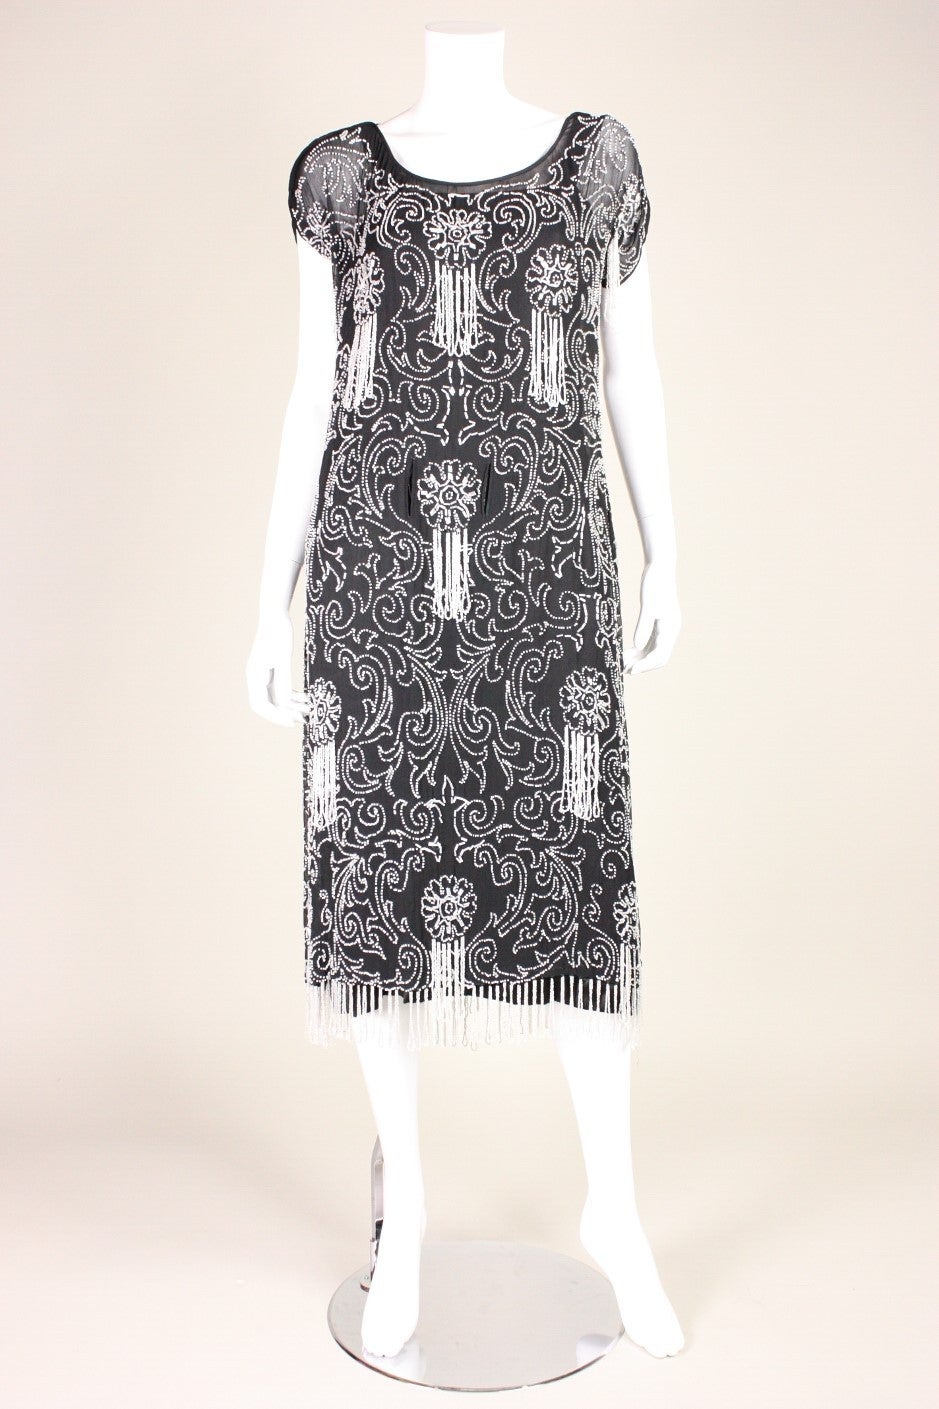 Vintage dress dates to the 1920's during the Art Deco era.  It is made of black silk chiffon with pearly white bugle beads sewn throughout in a scrolling pattern.  Beaded fringe throughout dress and at the hem.  Unlined, but comes with a black slip